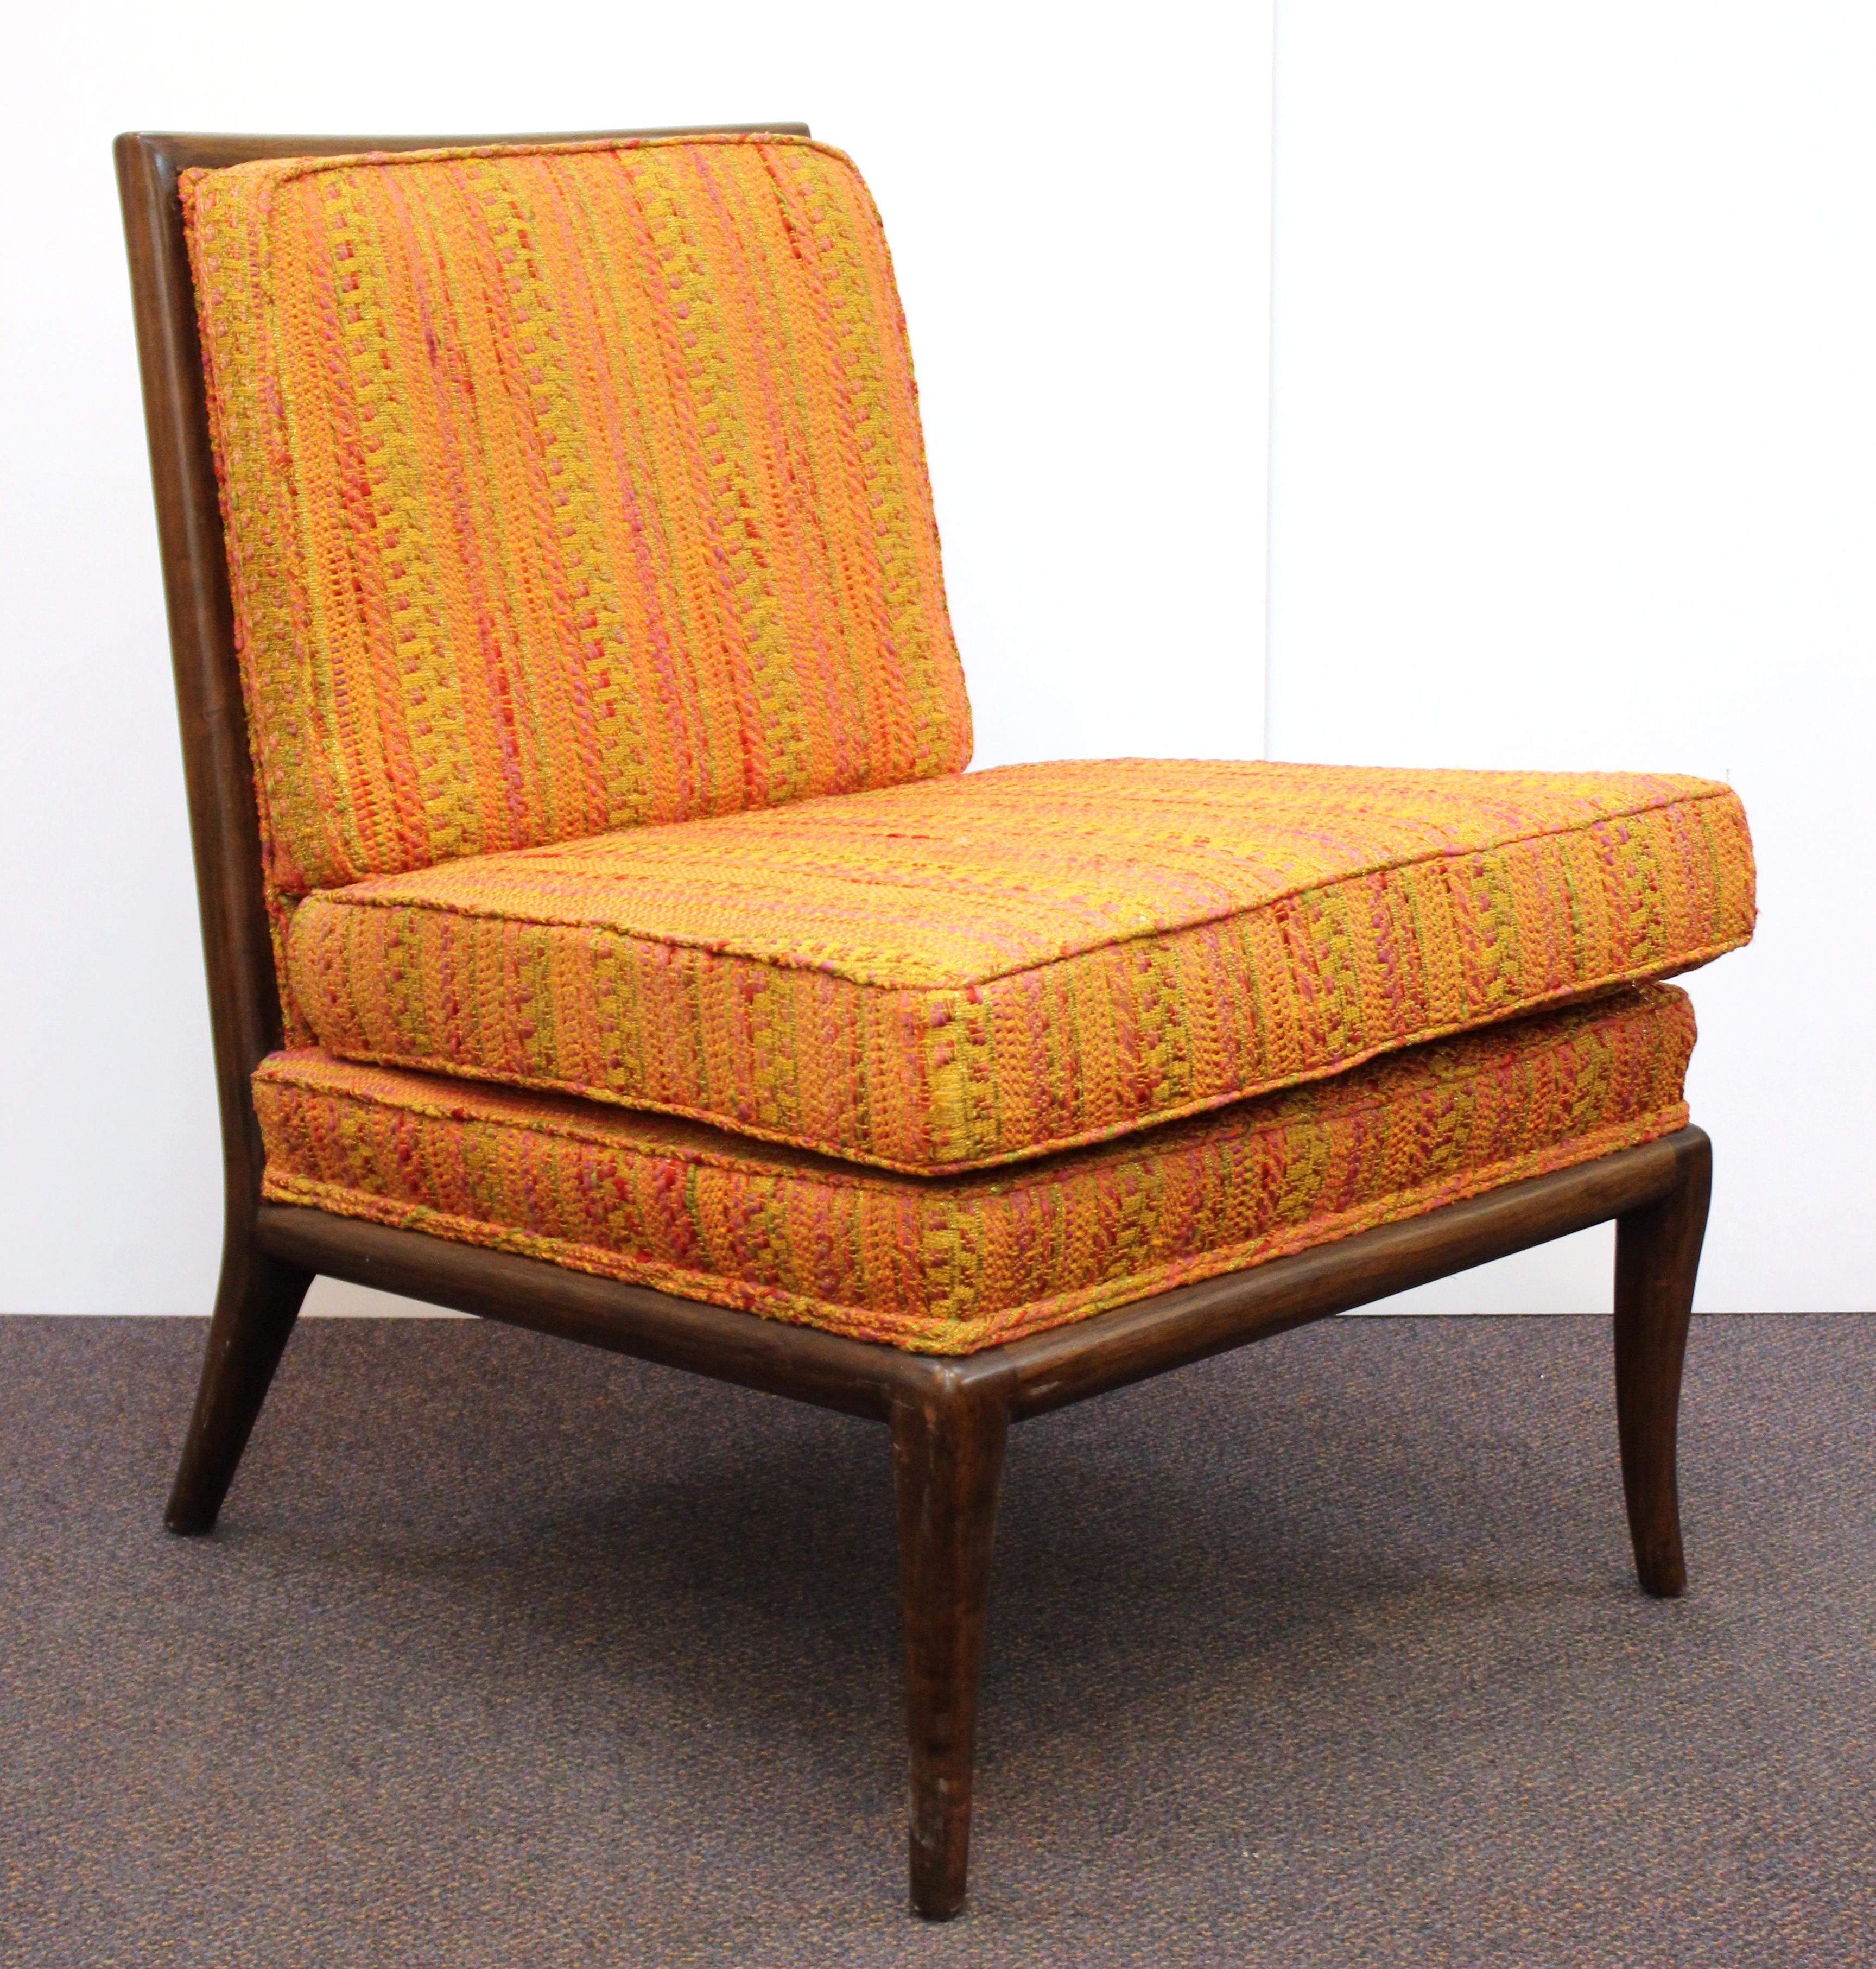 American Mid-Century Modern pair of slipper chairs designed by Robsjohn-Gibbings in the 1950s for Widdicomb. The chairs are crafted in mahogany and have been recently reupholstered with their original fabric.